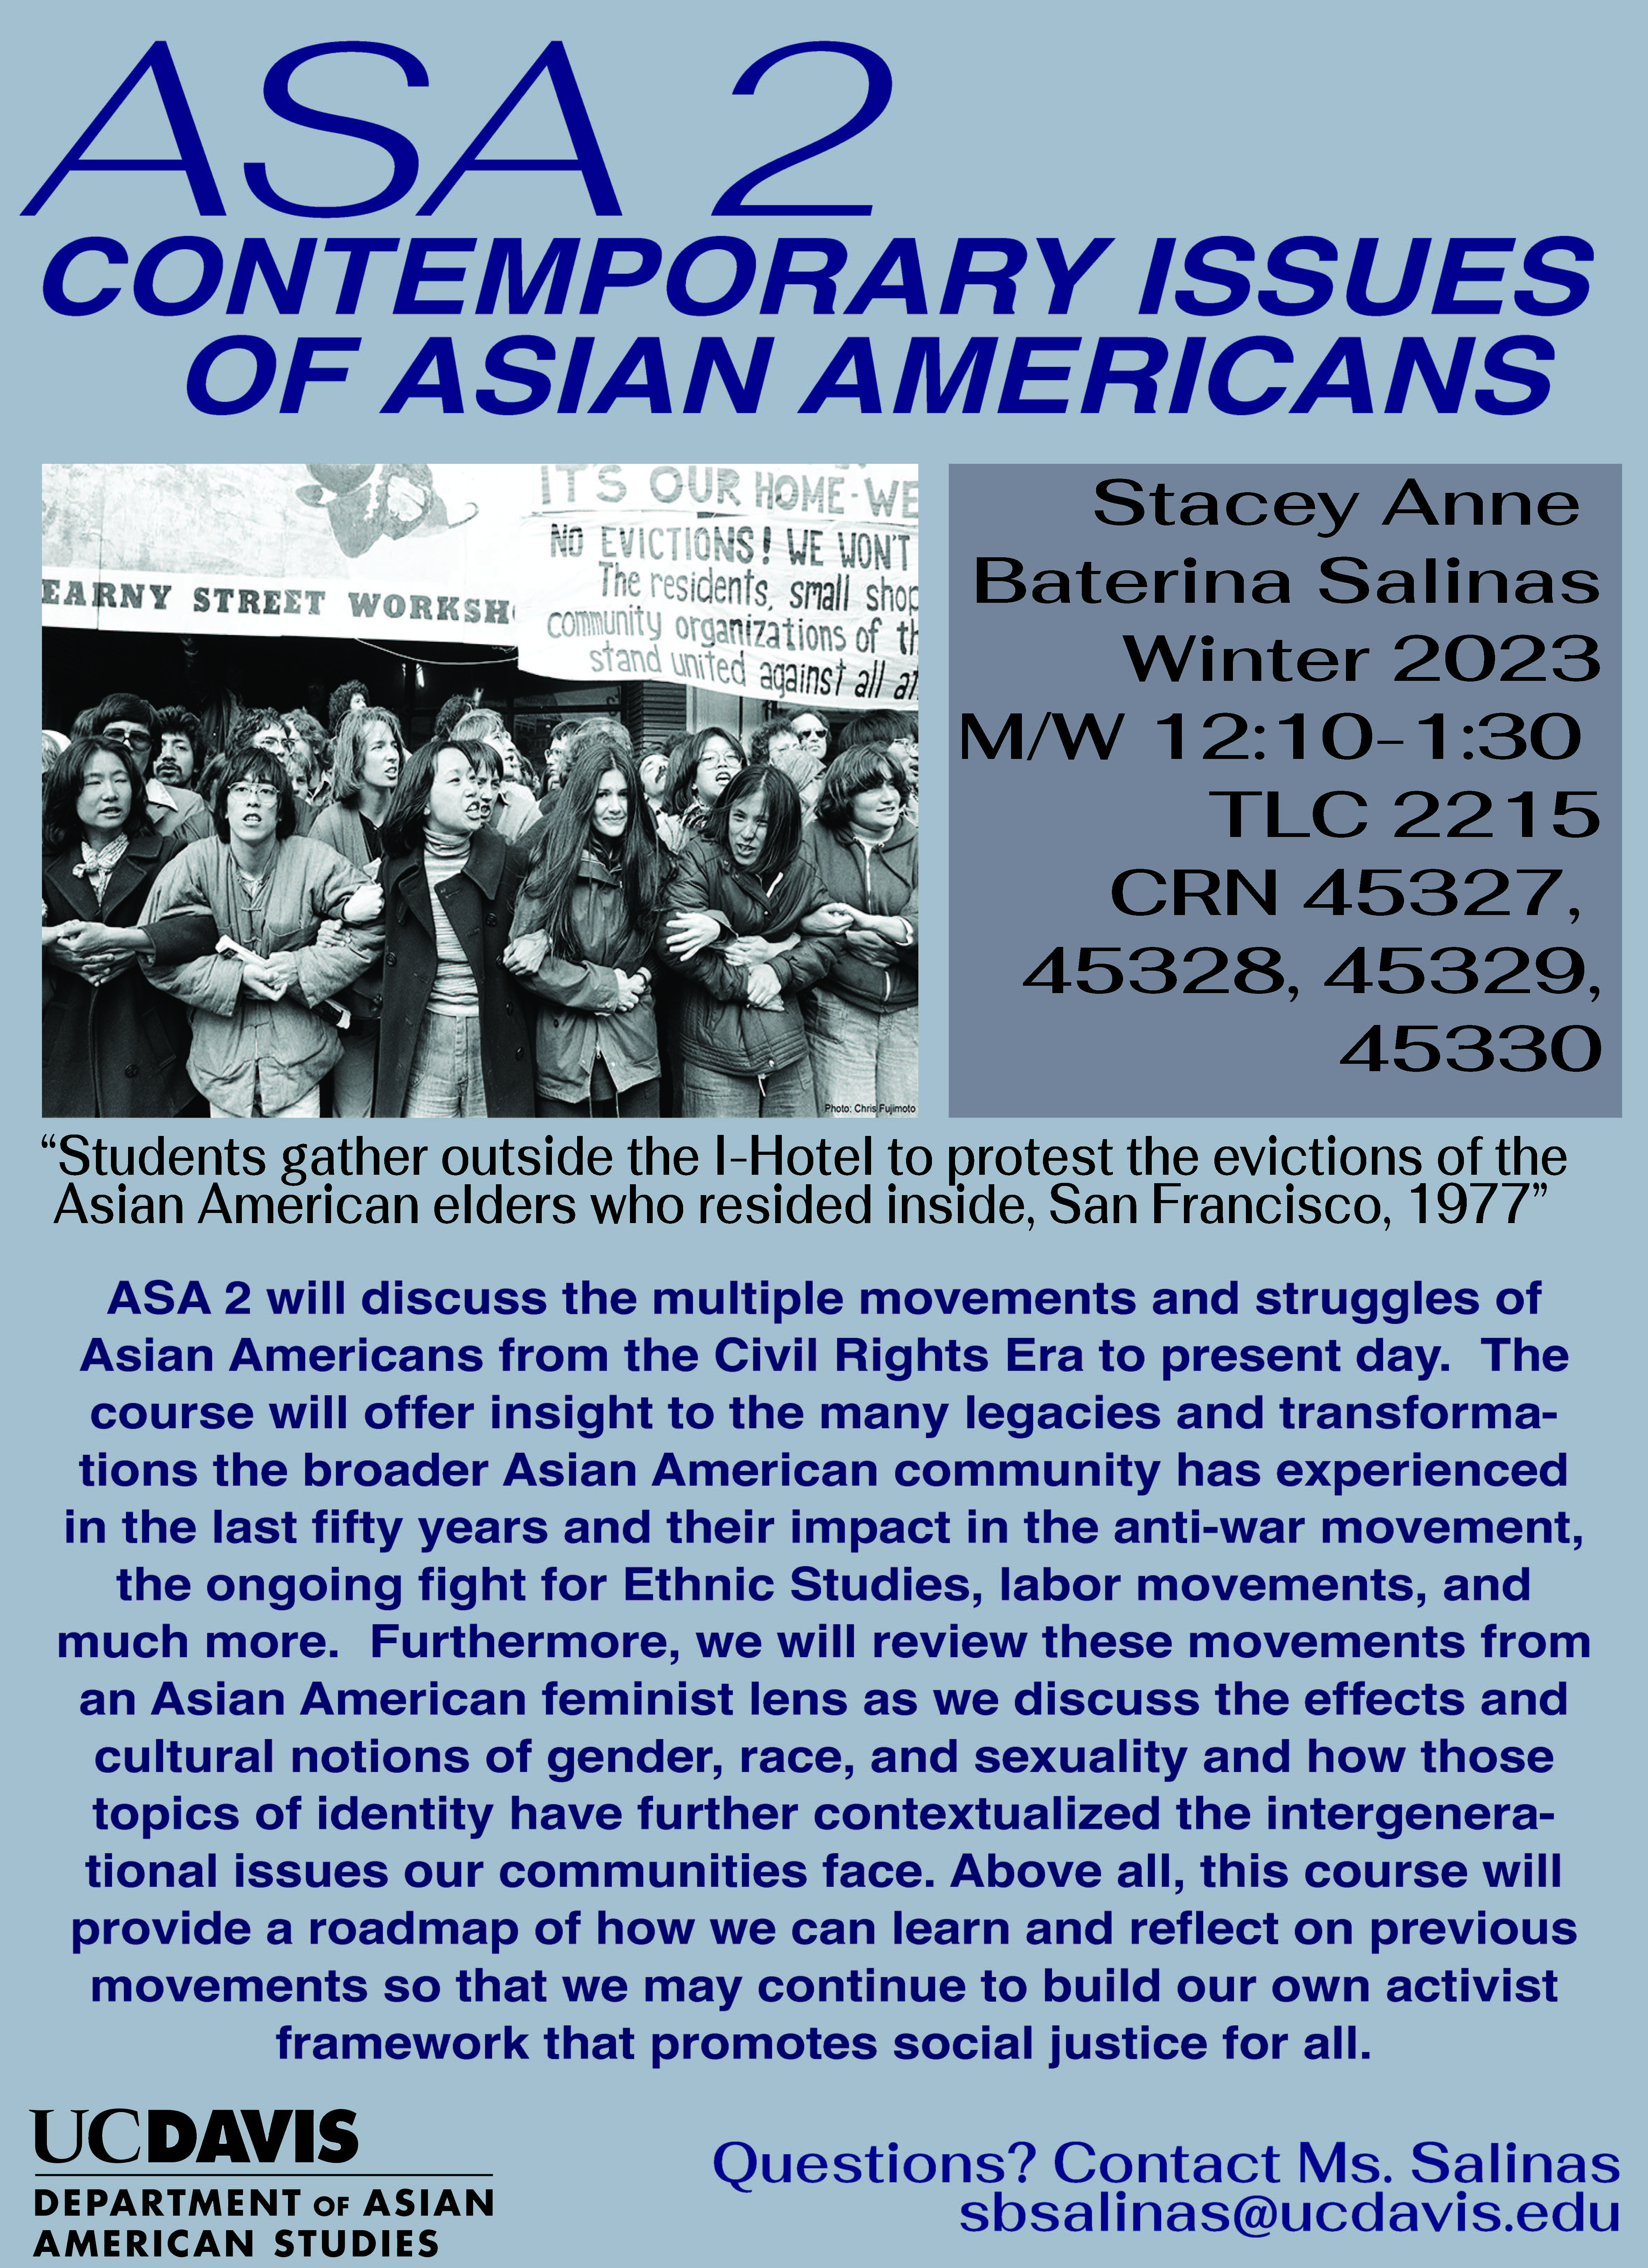 ASA 2 Contemporary Issues of Asian Americans course flyer for Winter 2023